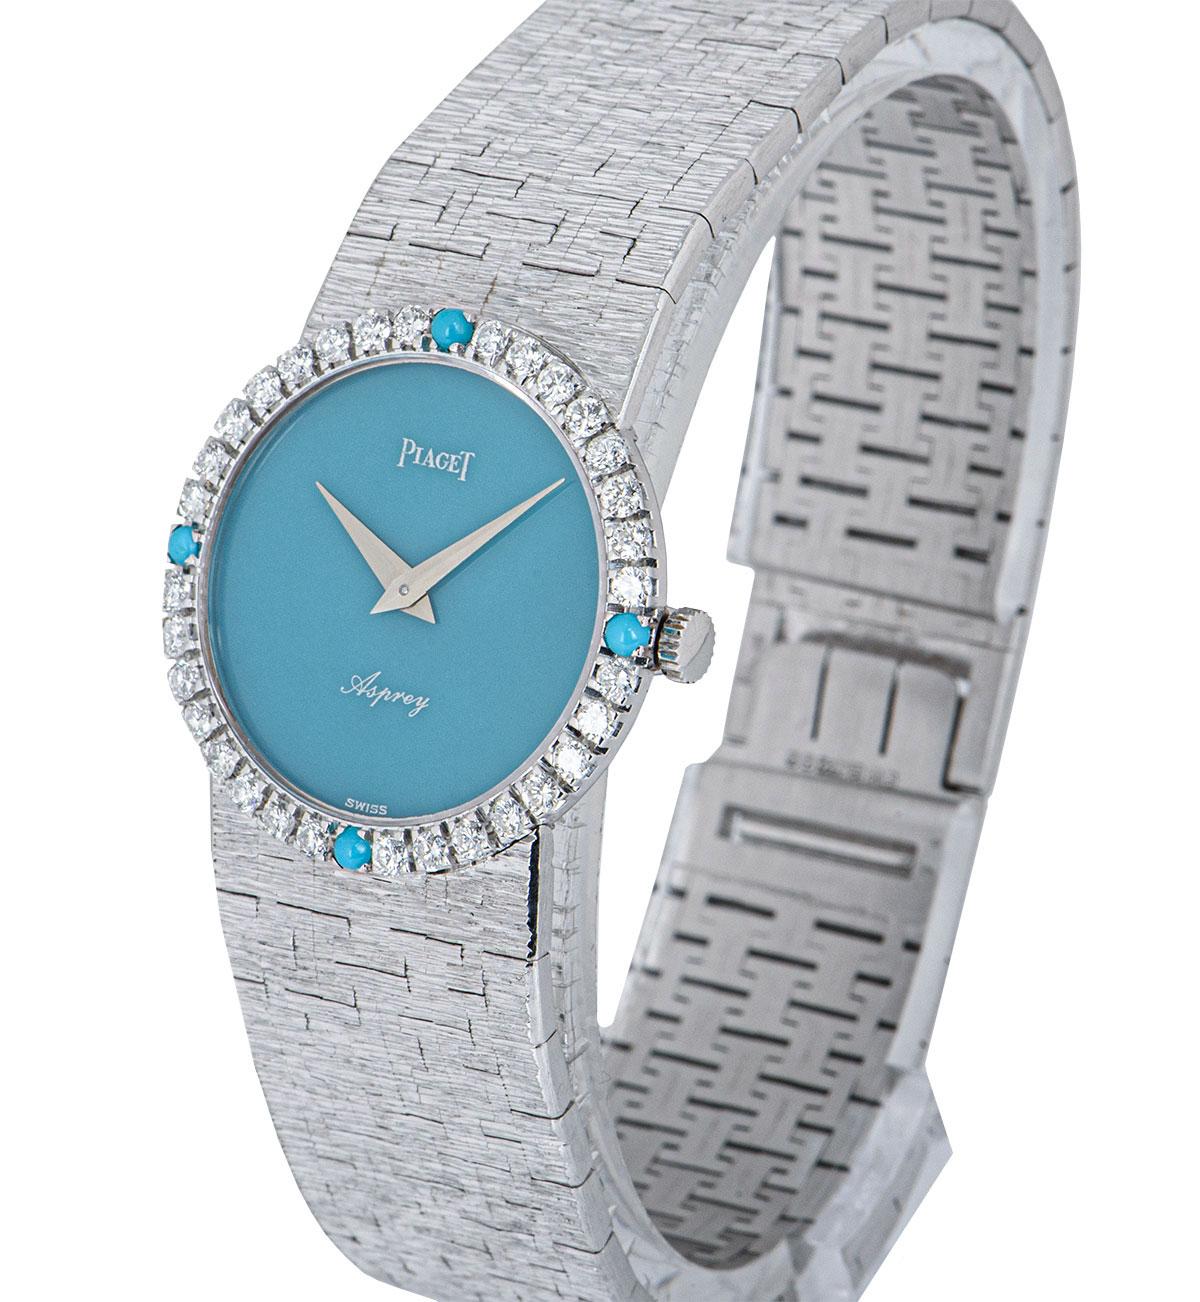 A 24 mm 18k White Gold Vintage Ladies Dress Wristwatch, double name Asprey turquoise stone dial, a fixed 18k white gold bezel set with 32 round brilliant cut diamonds and 4 turquoise stones, an 18k white gold textured integrated bracelet with an 18k